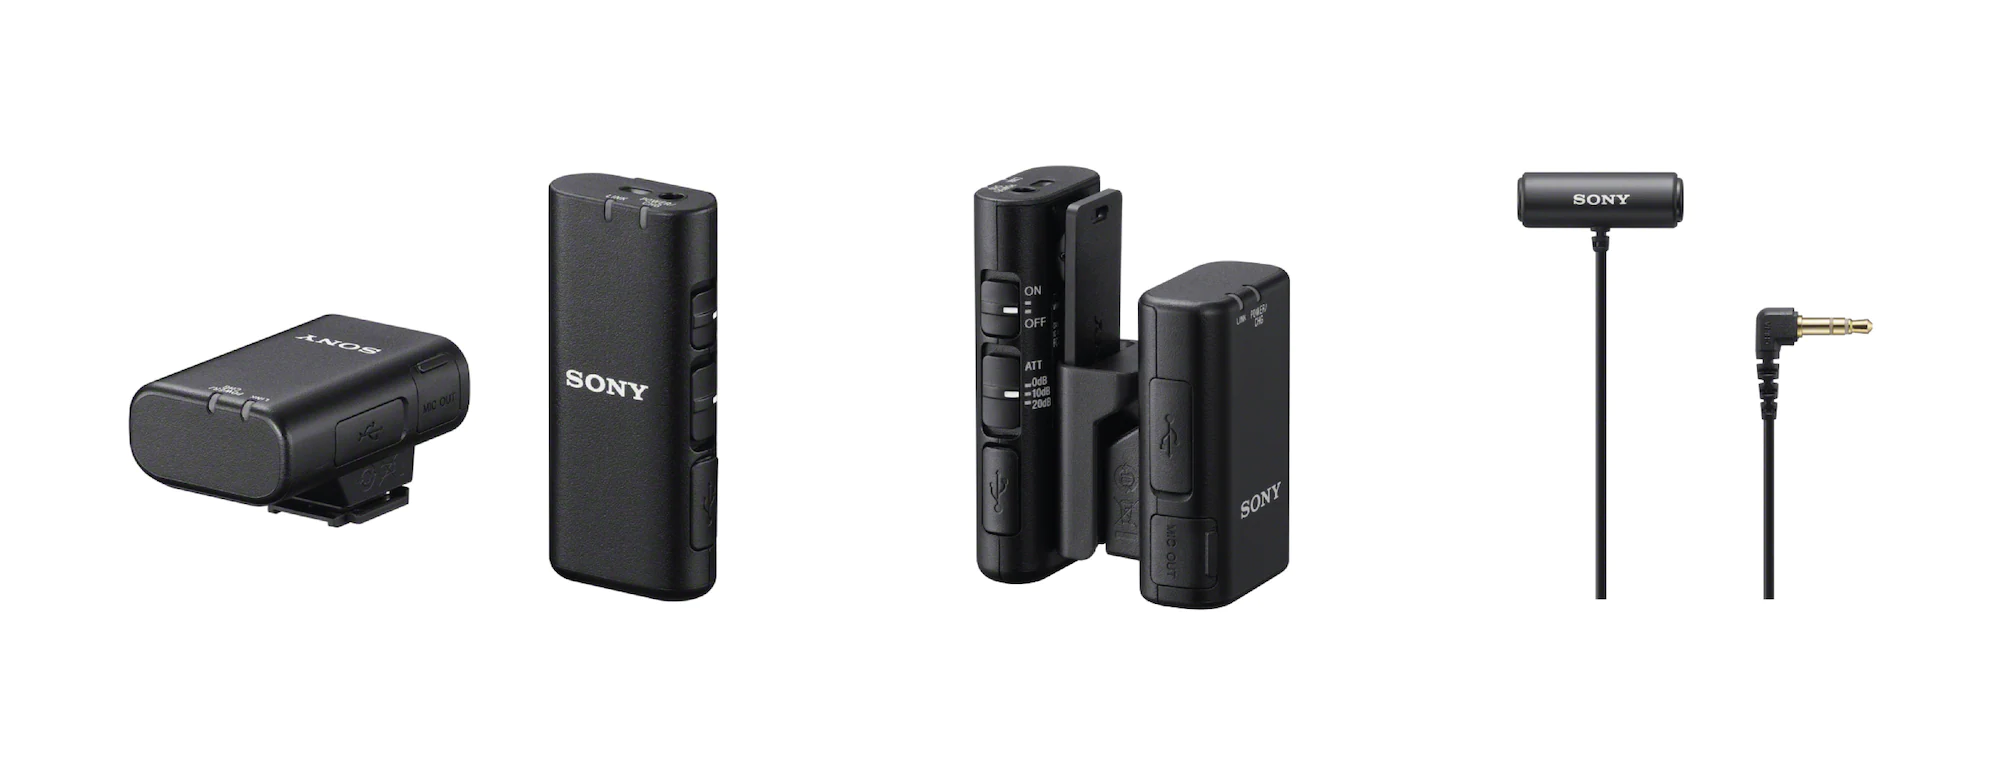 Two new microphones with high-quality and stable audio recordings for video  creators: ECM-W2BT and ECM-LV1